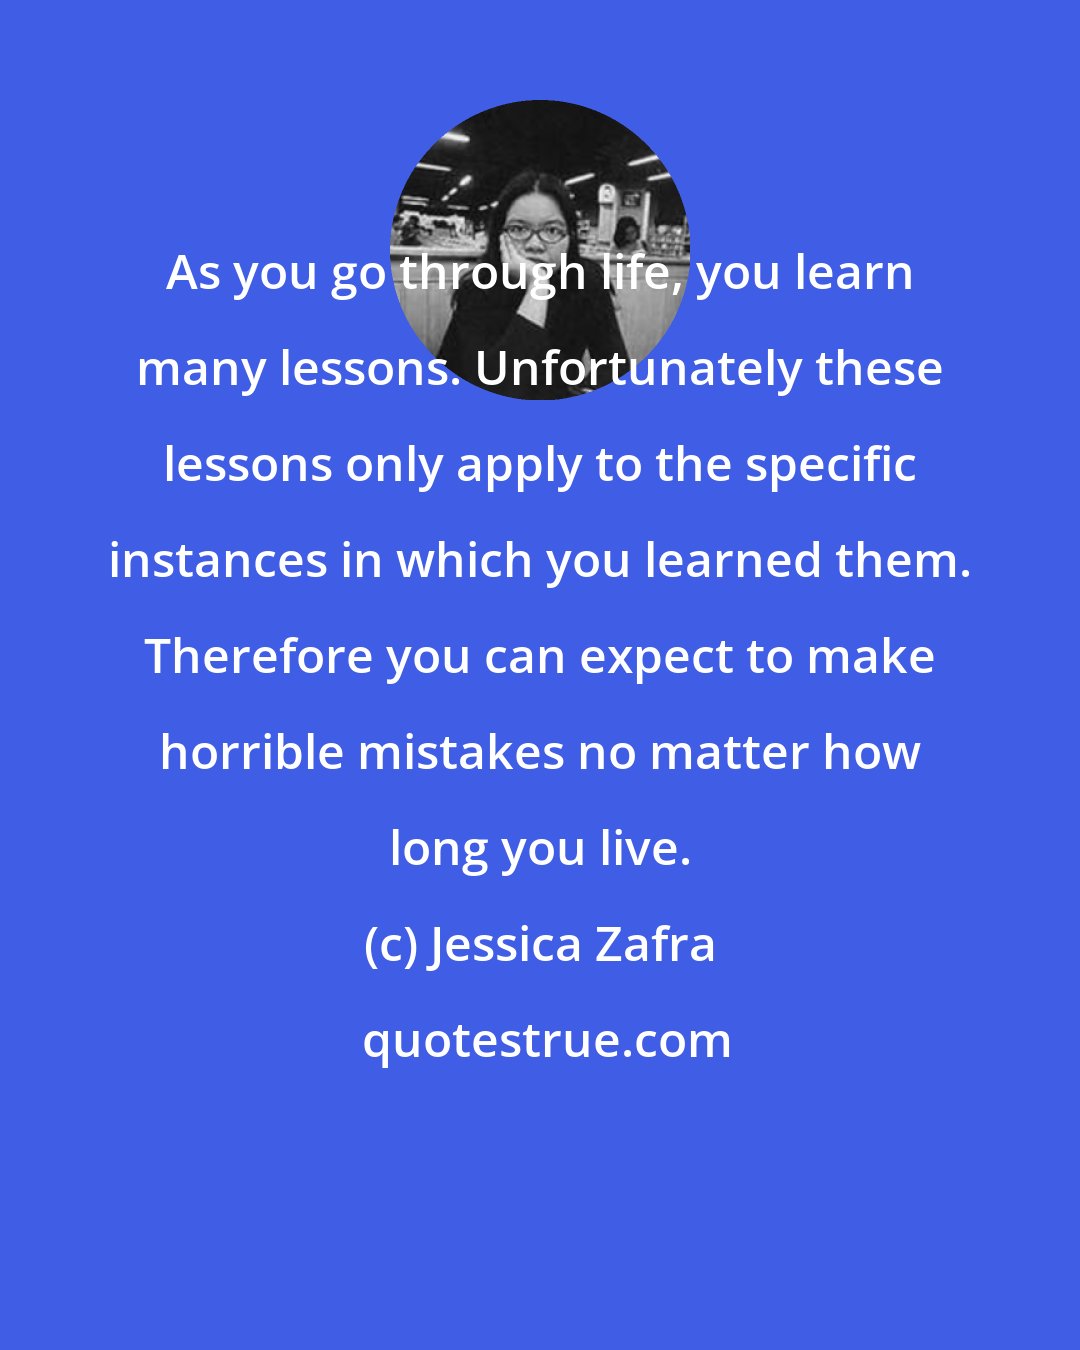 Jessica Zafra: As you go through life, you learn many lessons. Unfortunately these lessons only apply to the specific instances in which you learned them. Therefore you can expect to make horrible mistakes no matter how long you live.